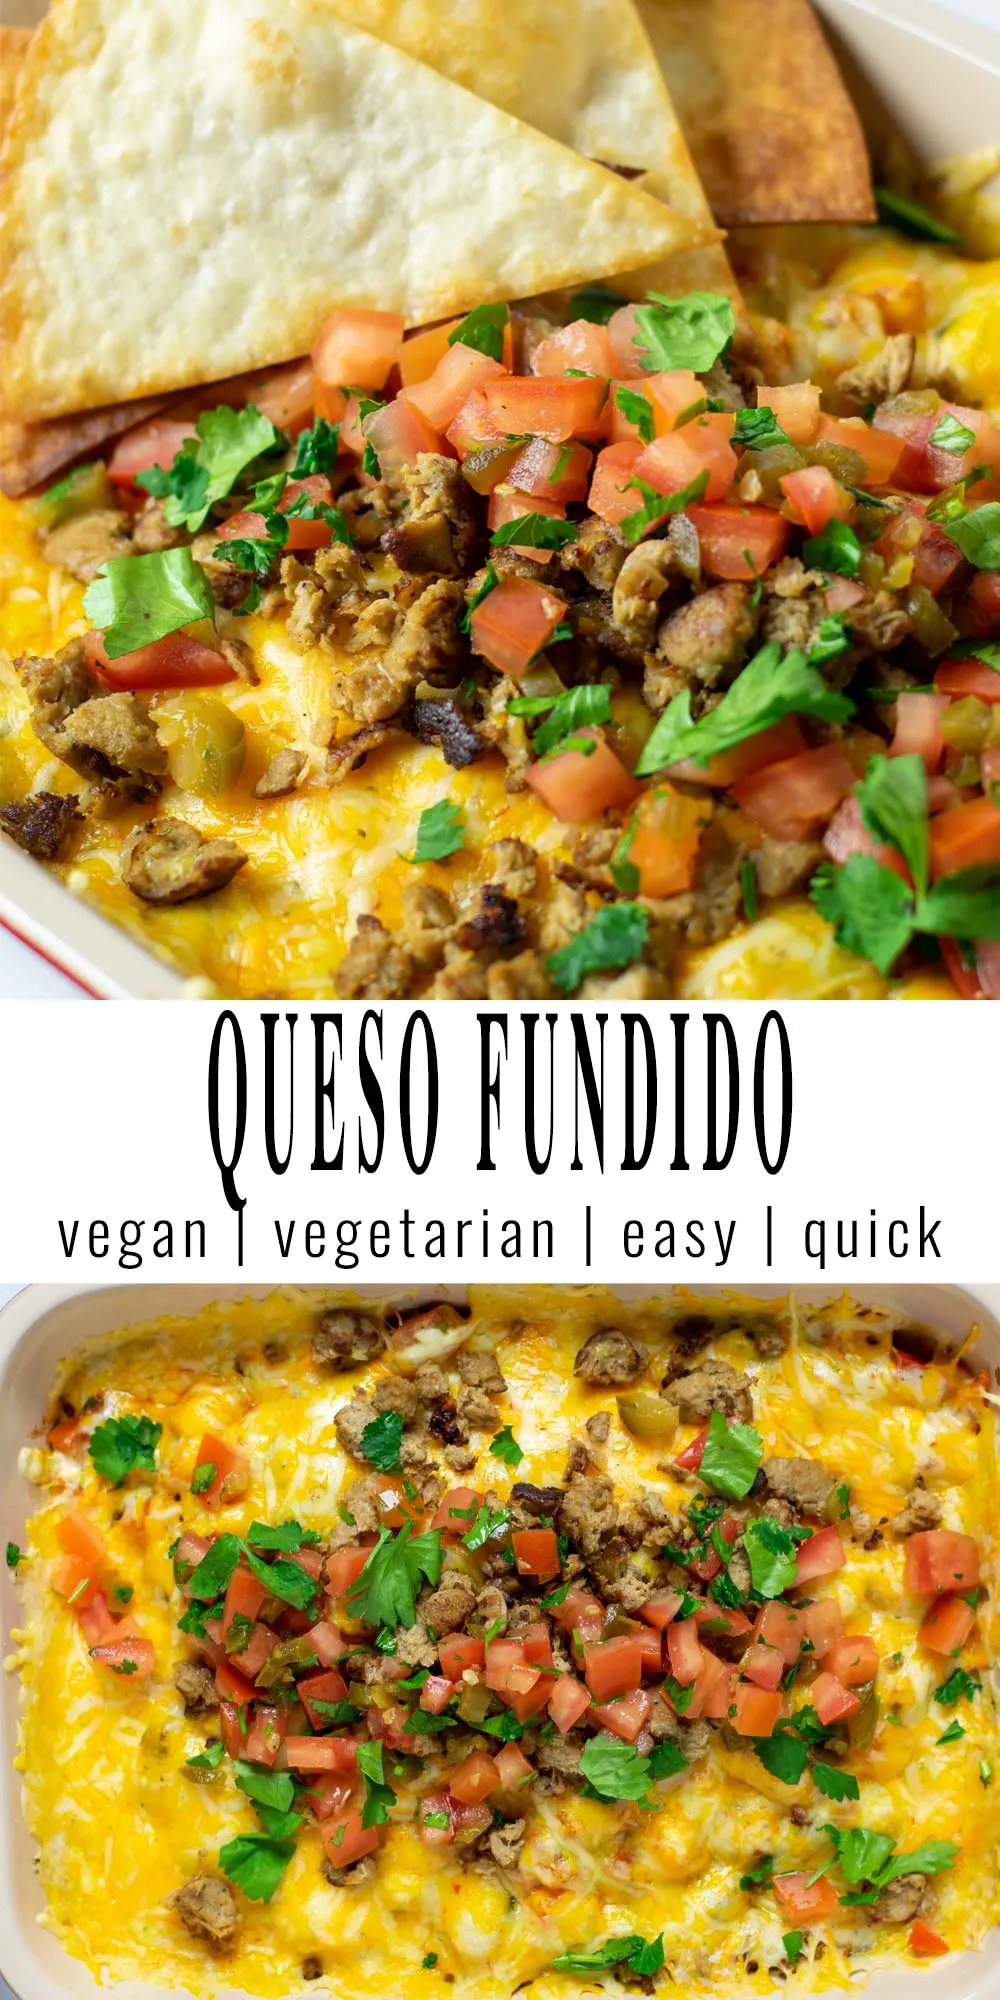 Collage of two pictures of Queso Fundido with recipe title text.